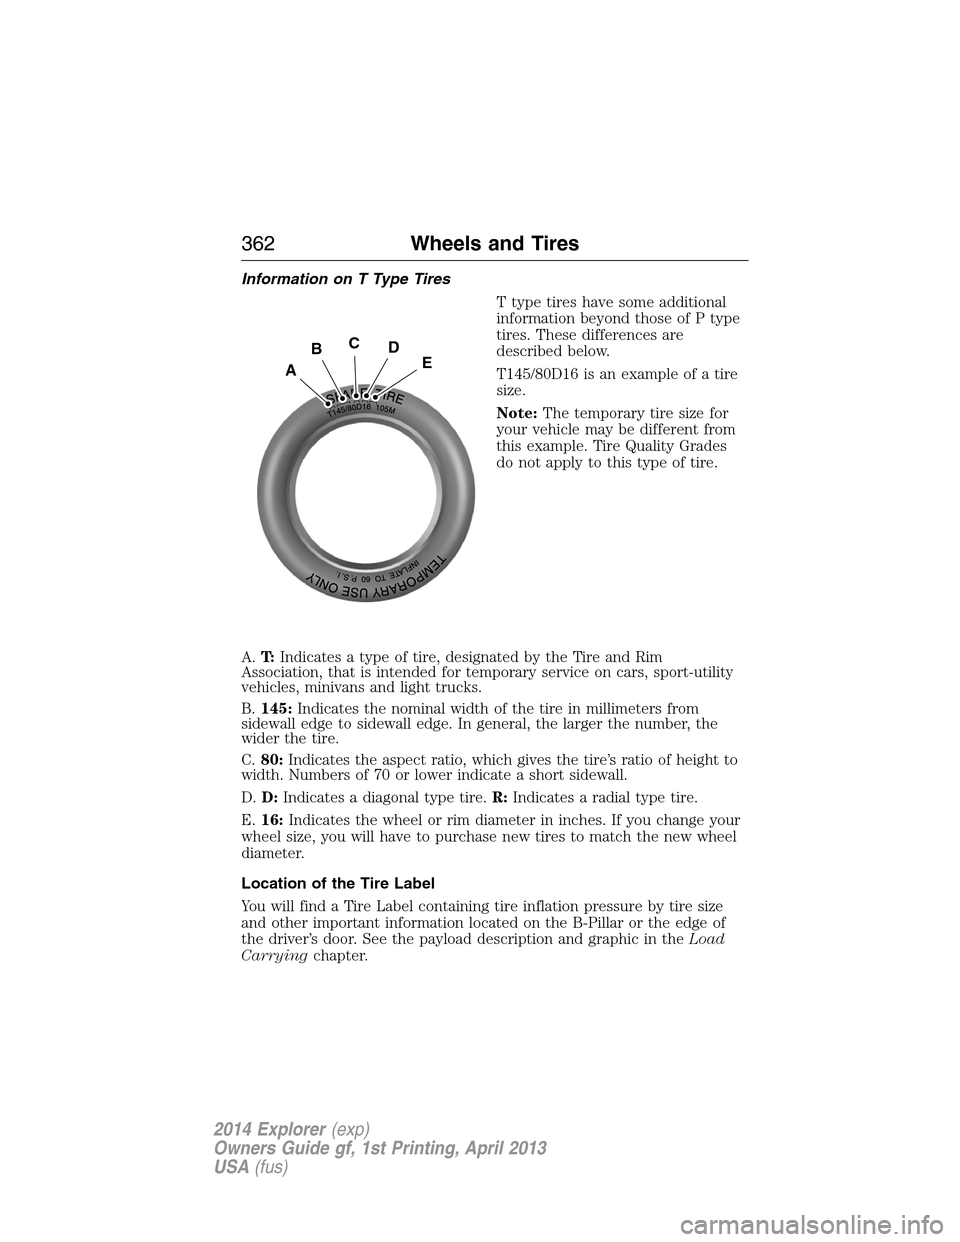 FORD EXPLORER 2014 5.G Owners Manual Information on T Type Tires
T type tires have some additional
information beyond those of P type
tires. These differences are
described below.
T145/80D16 is an example of a tire
size.
Note:The tempora